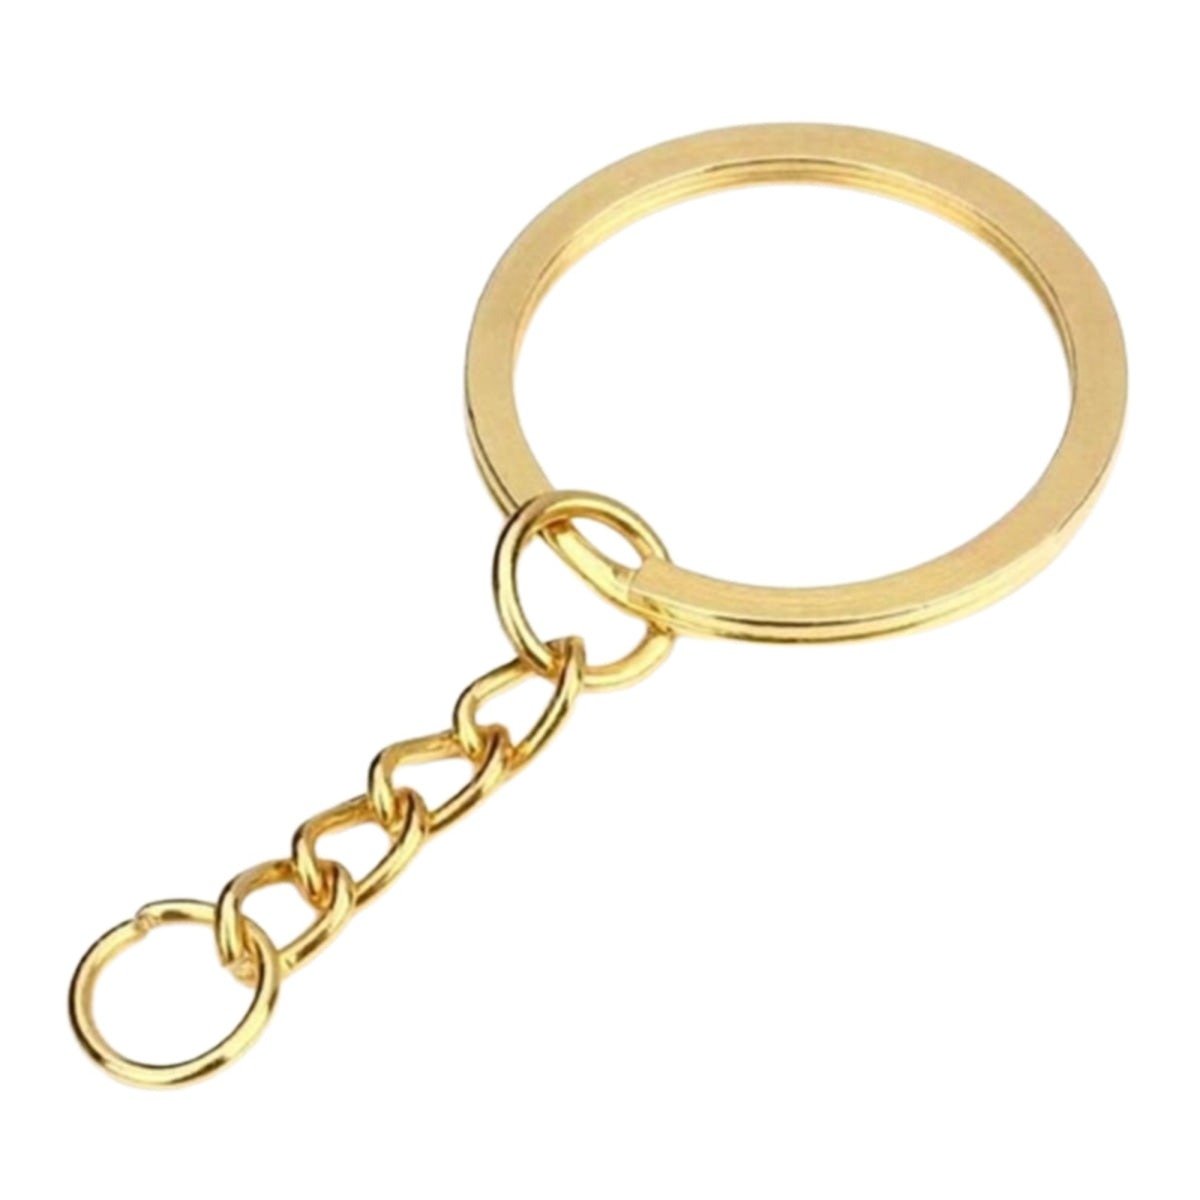 20pcs 28mm Gold Ancient Keyring Keychain Split Ring Chain Key Rings Key Chains - Gold - - Asia Sell